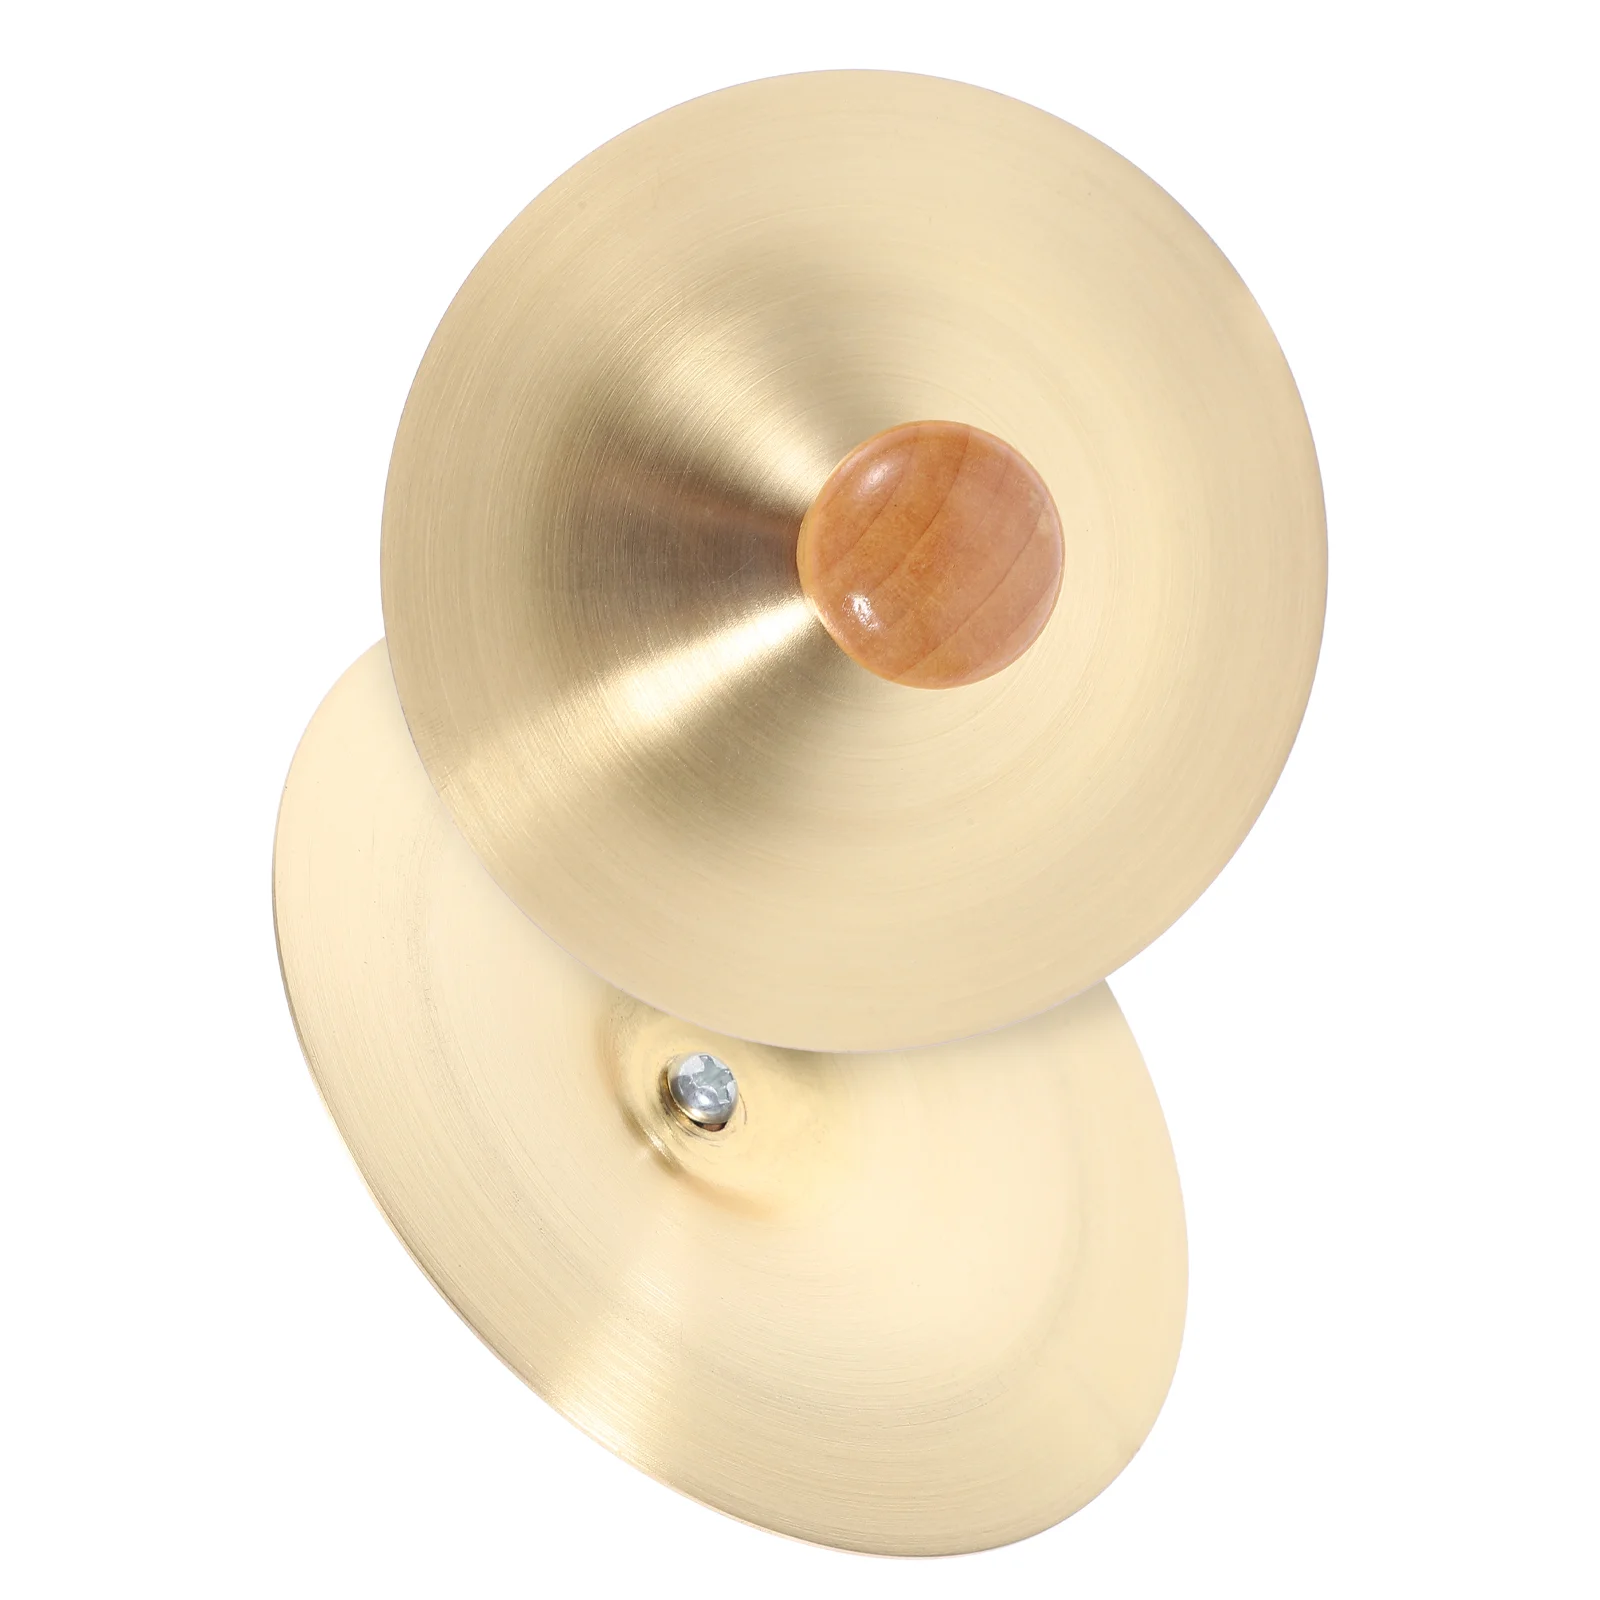 

2 Pcs Copper Cymbals Jing Belly Dance Percussion Mini Gifts Finger Instrument Children Small Toys Kids Dancing Wireless